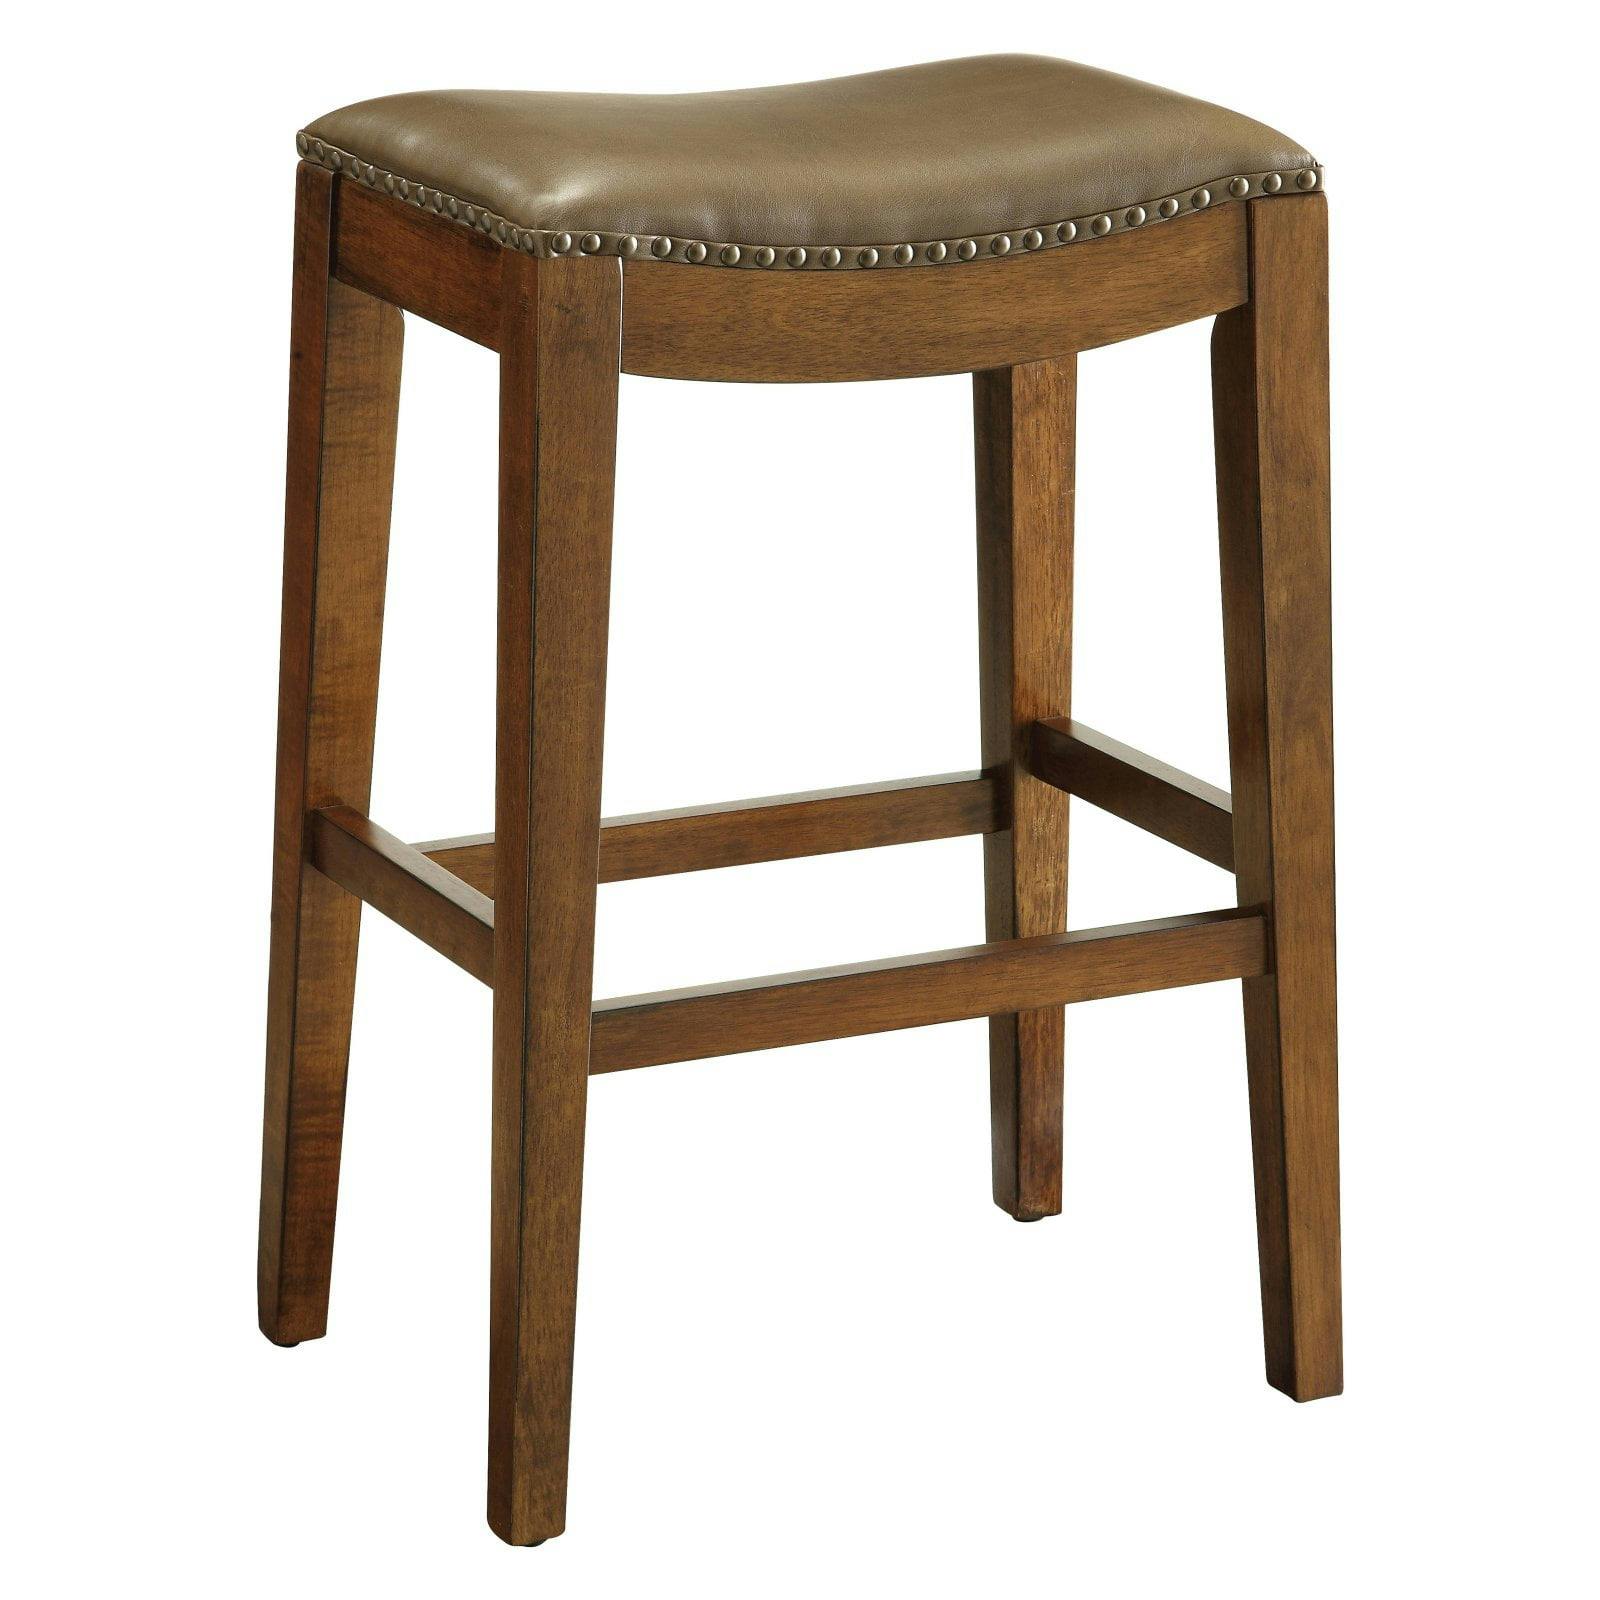 Rustic Cottage 29" Espresso Wood Saddle Bar Stool with Leather Seat